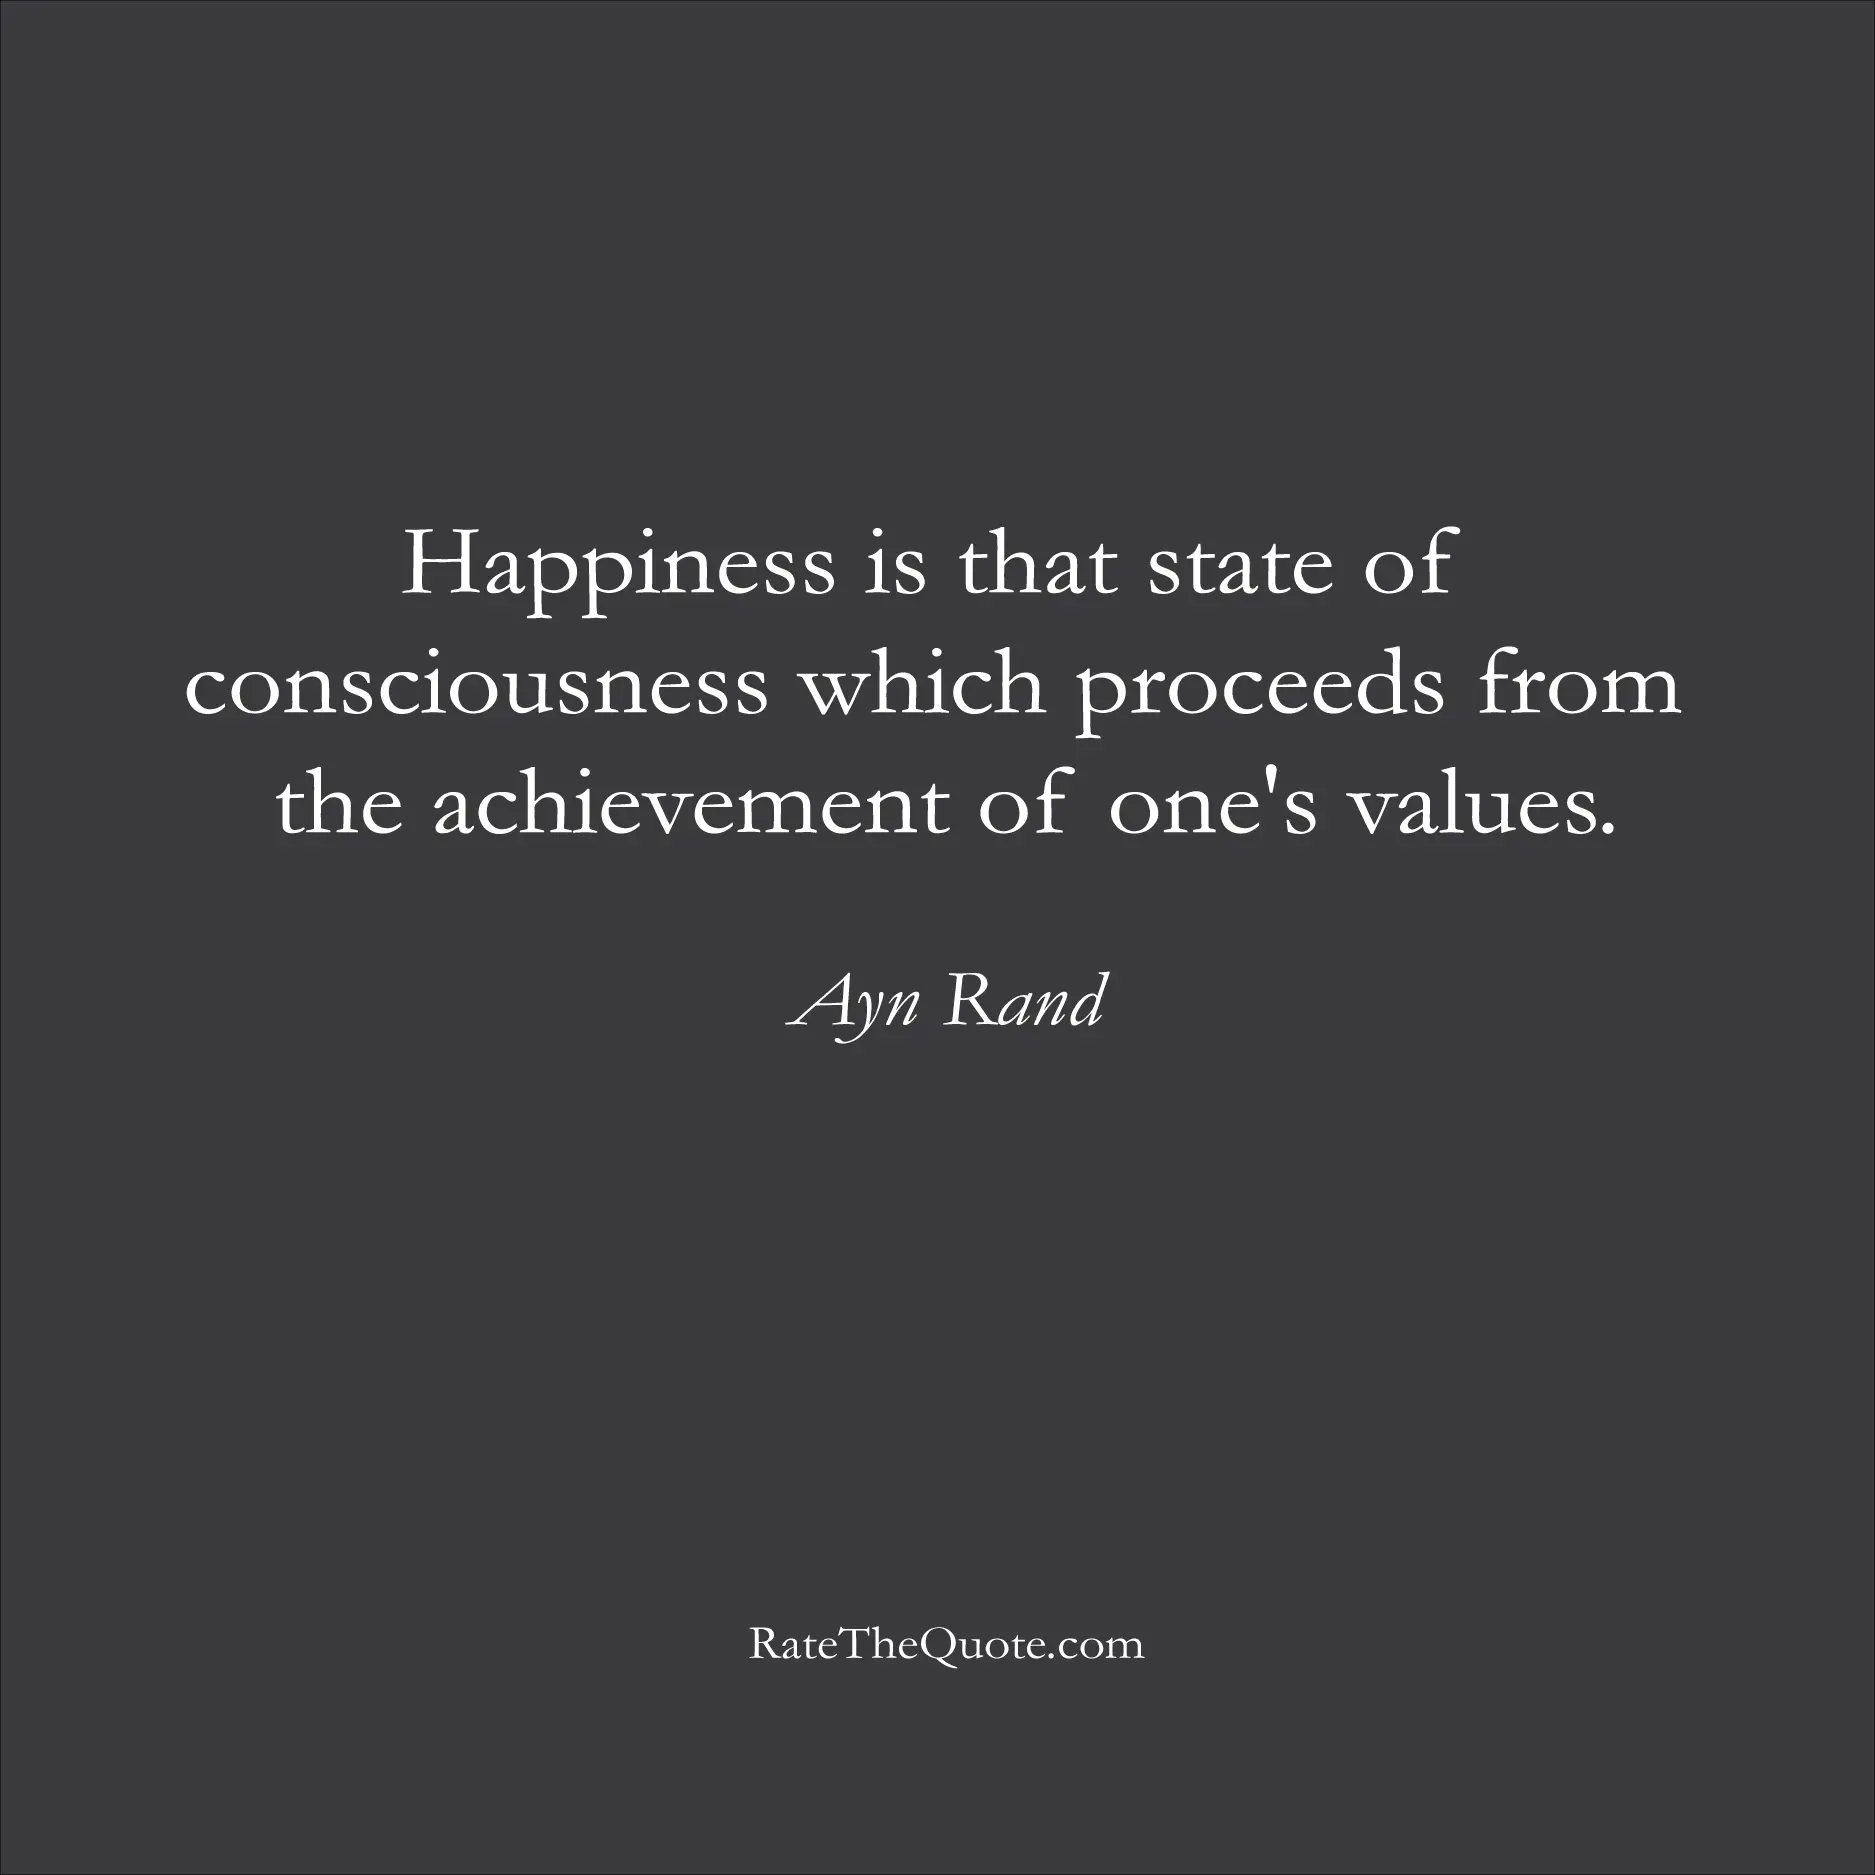 Happiness Quotes Happiness is that state of consciousness which proceeds from the achievement of one's values. Ayn Rand